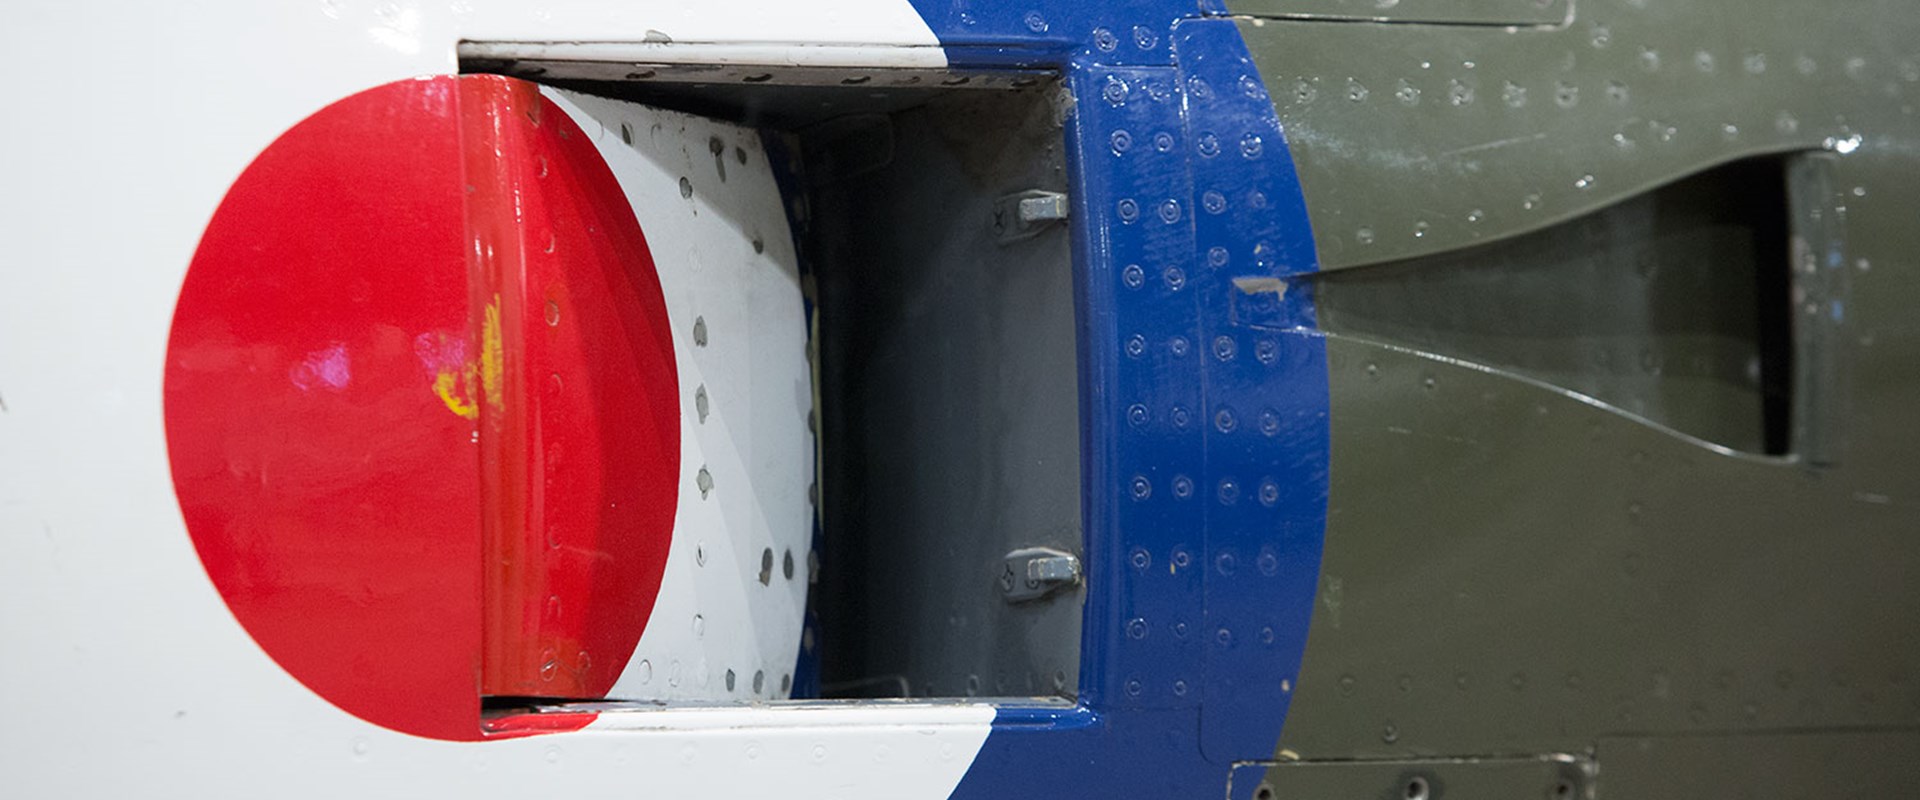 Close up of a portion of an RAF aircraft